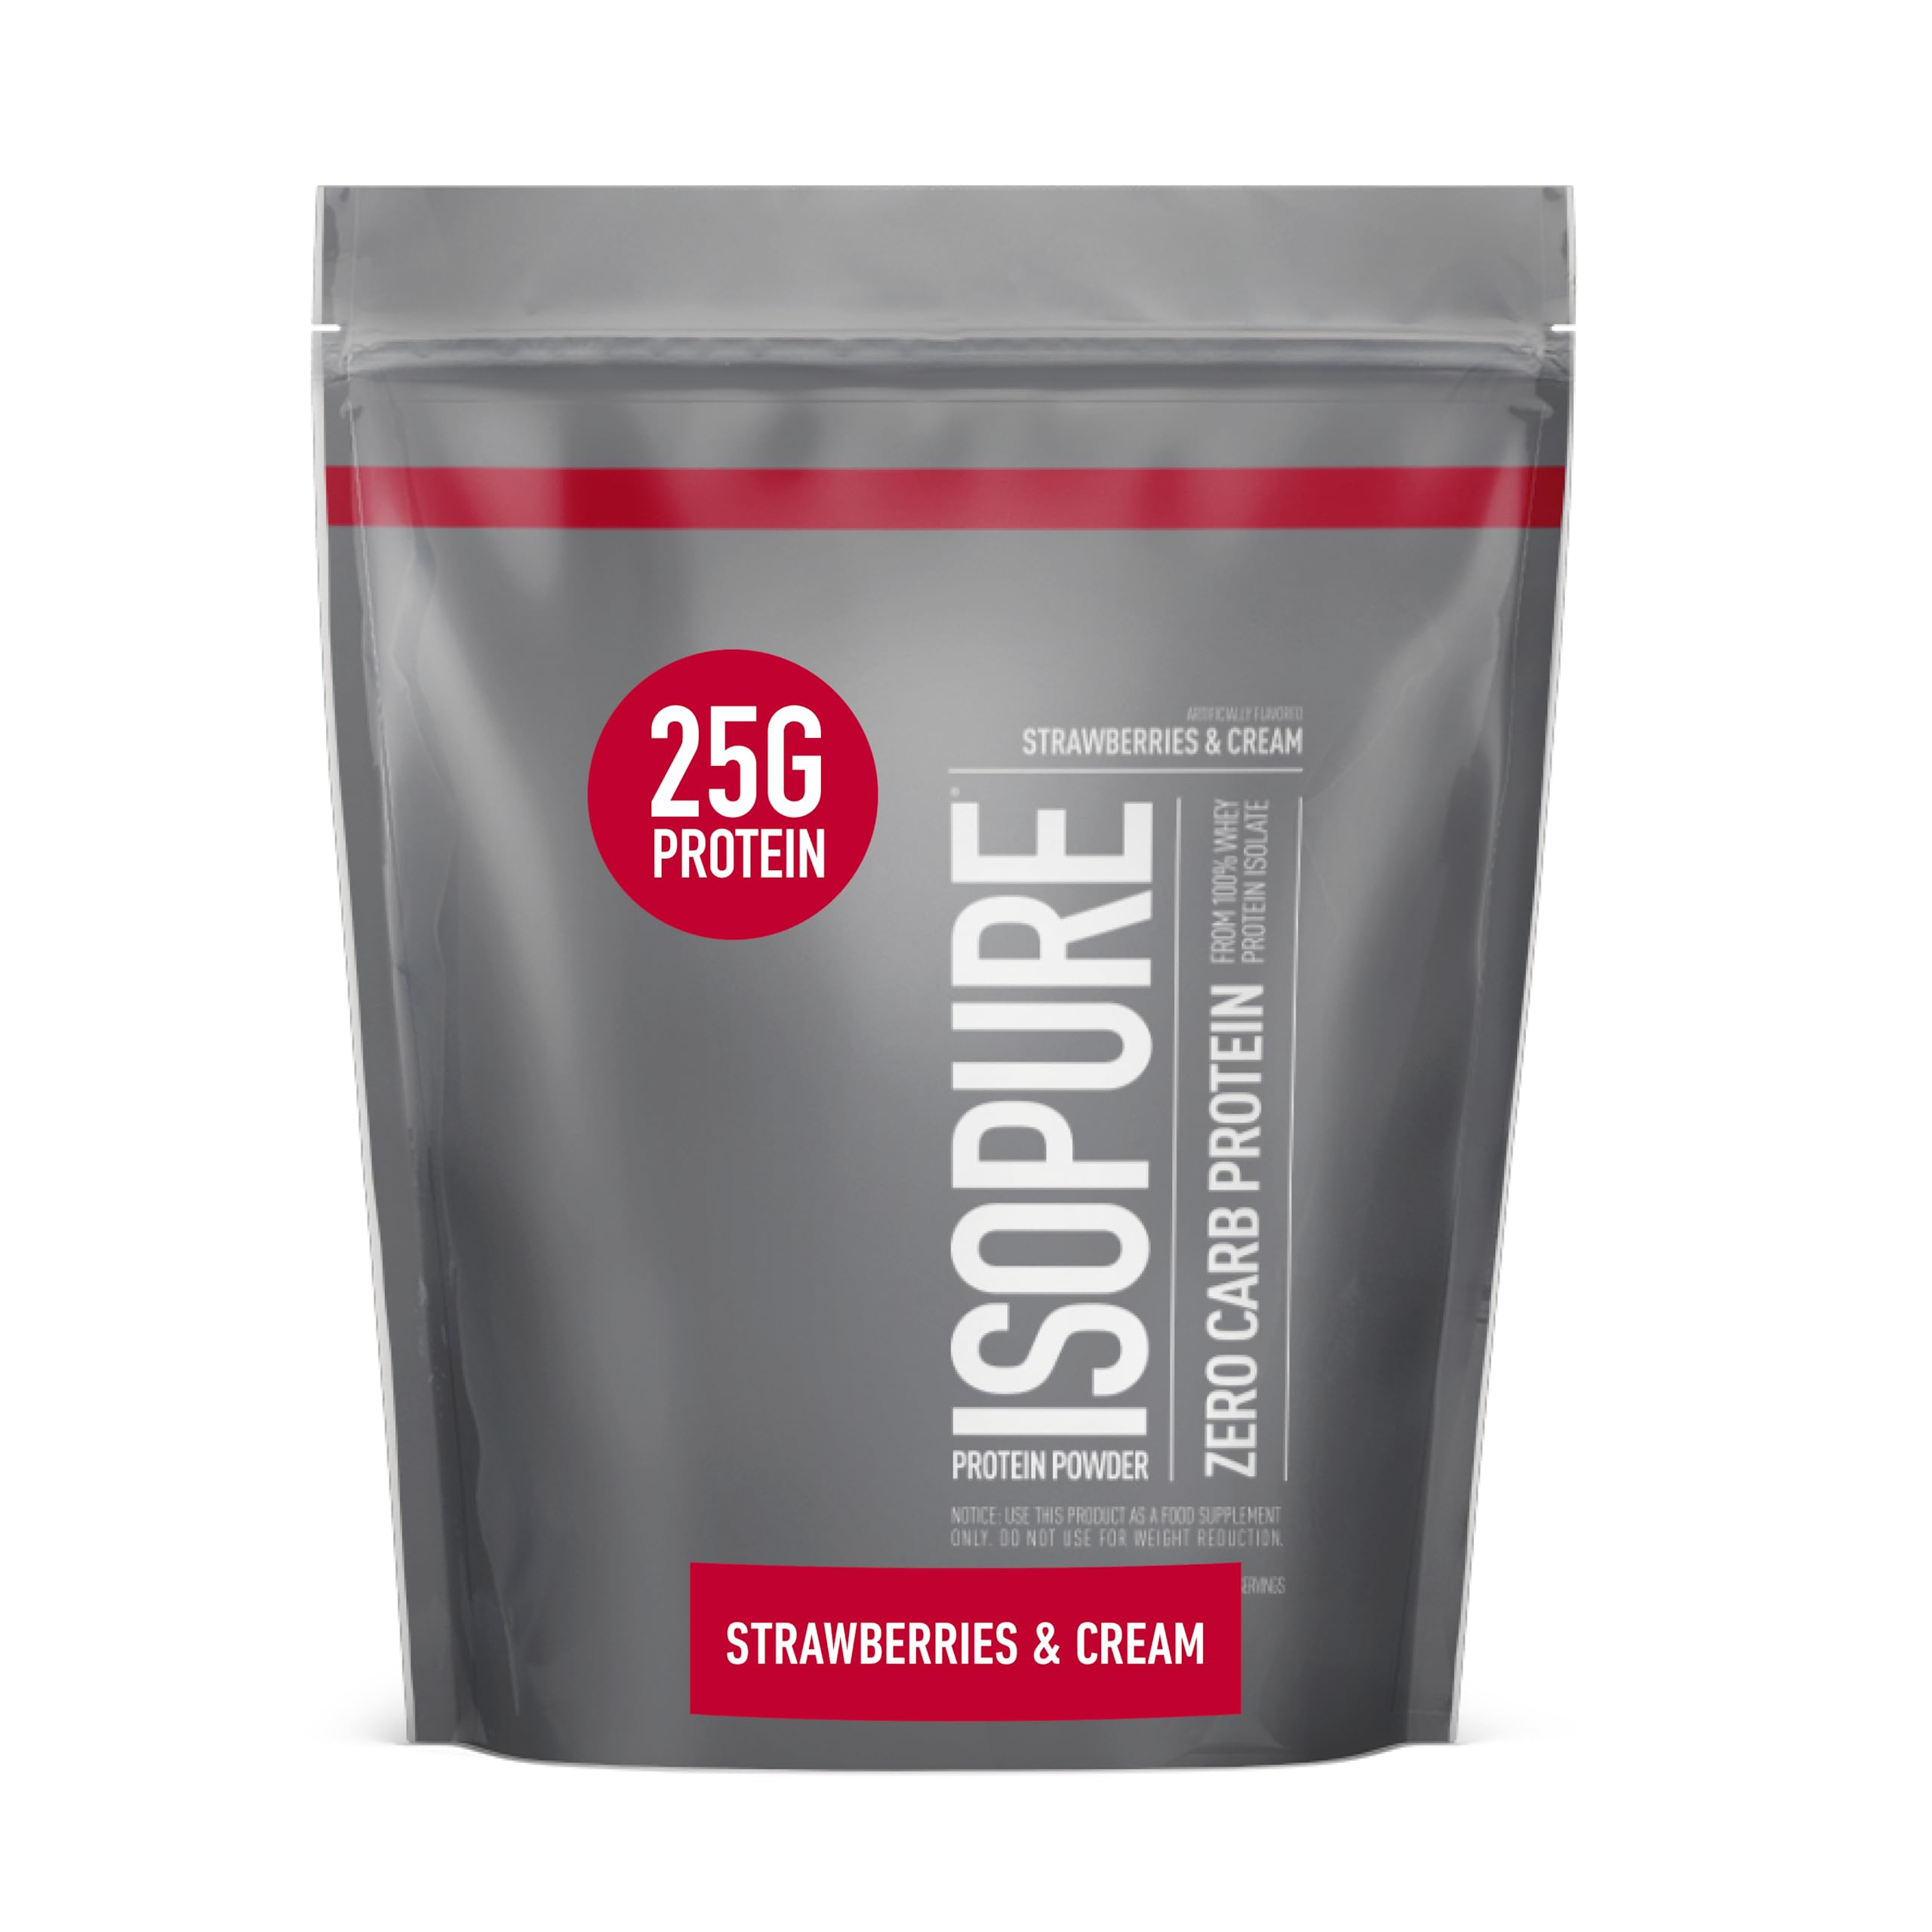 Isopure Protein Powder, Whey Isolate Powder with 3 Pound (Pack of